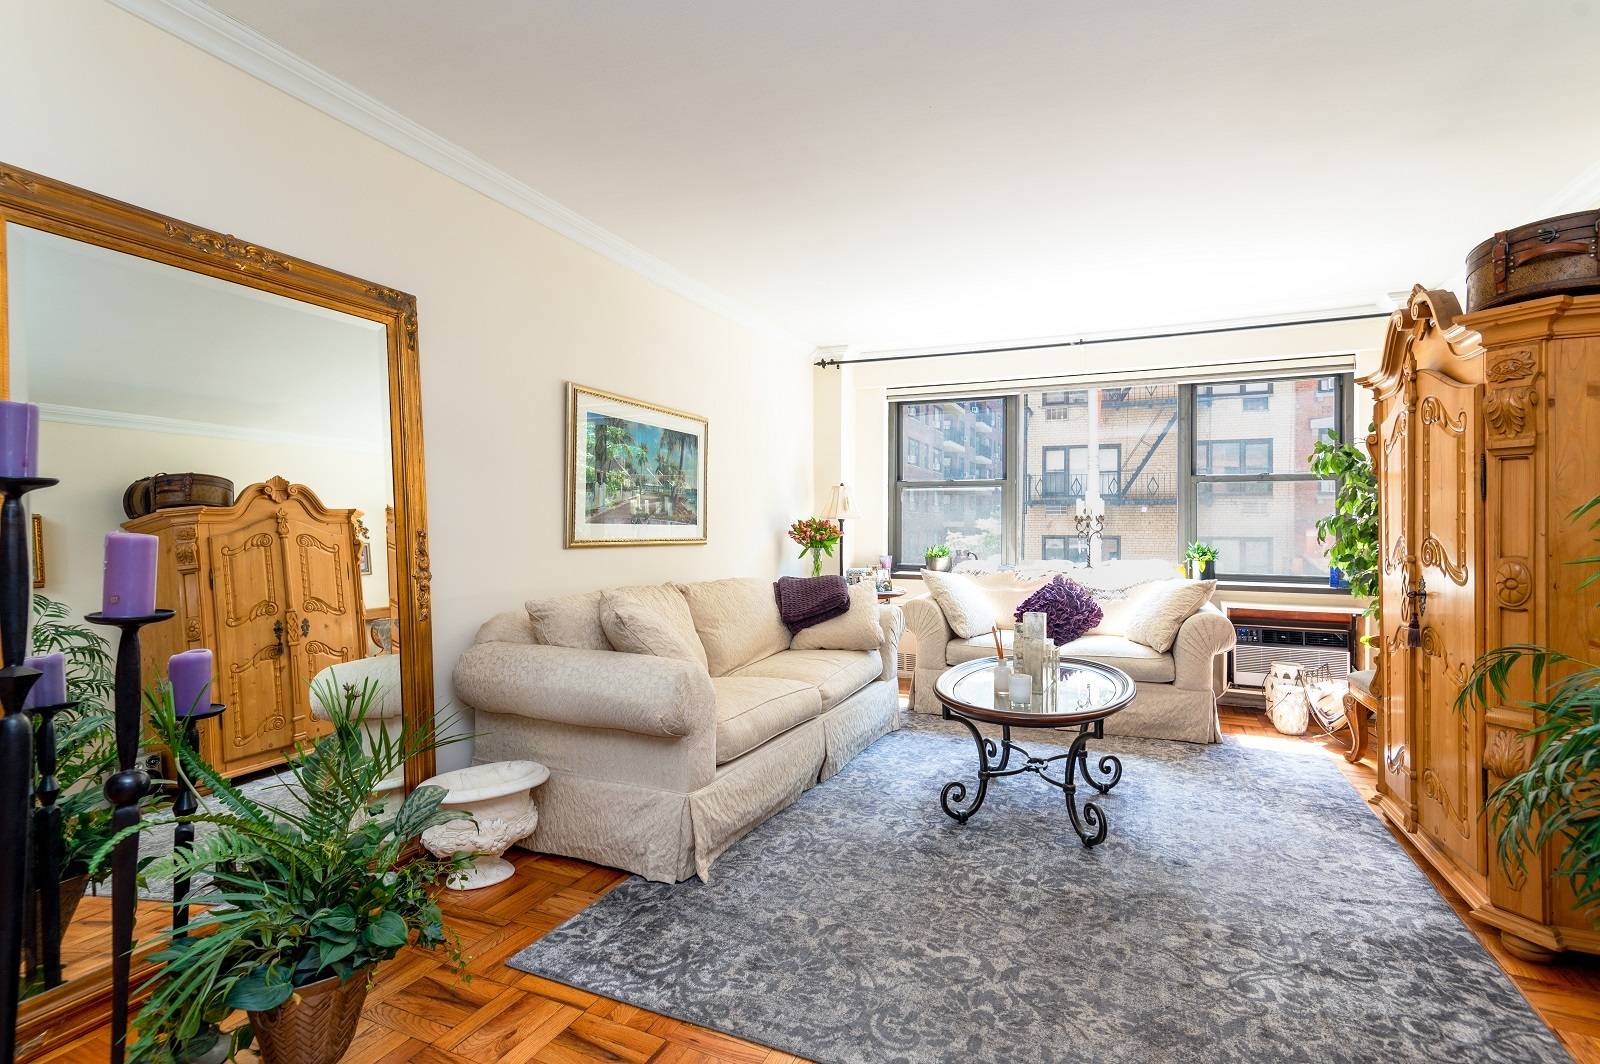 This one bedroom home boasts exceptionally large rooms, and south facing windows bring in natural light all day long.